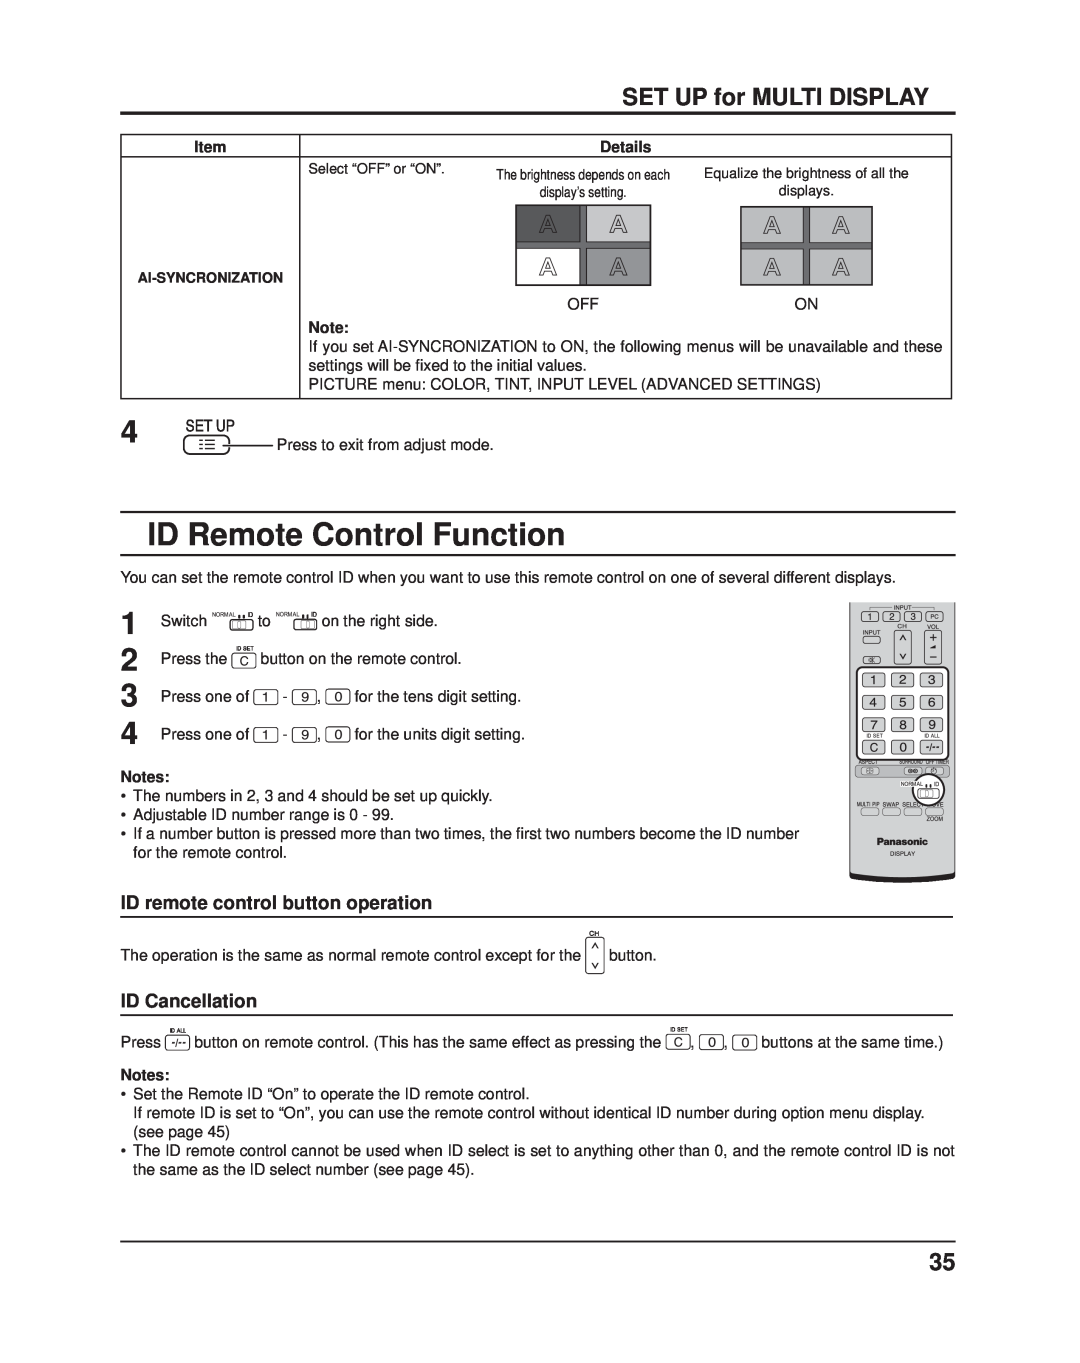 Panasonic TH-42PF11UK ID Remote Control Function, SET UP for MULTI DISPLAY, ID remote control button operation, Details 